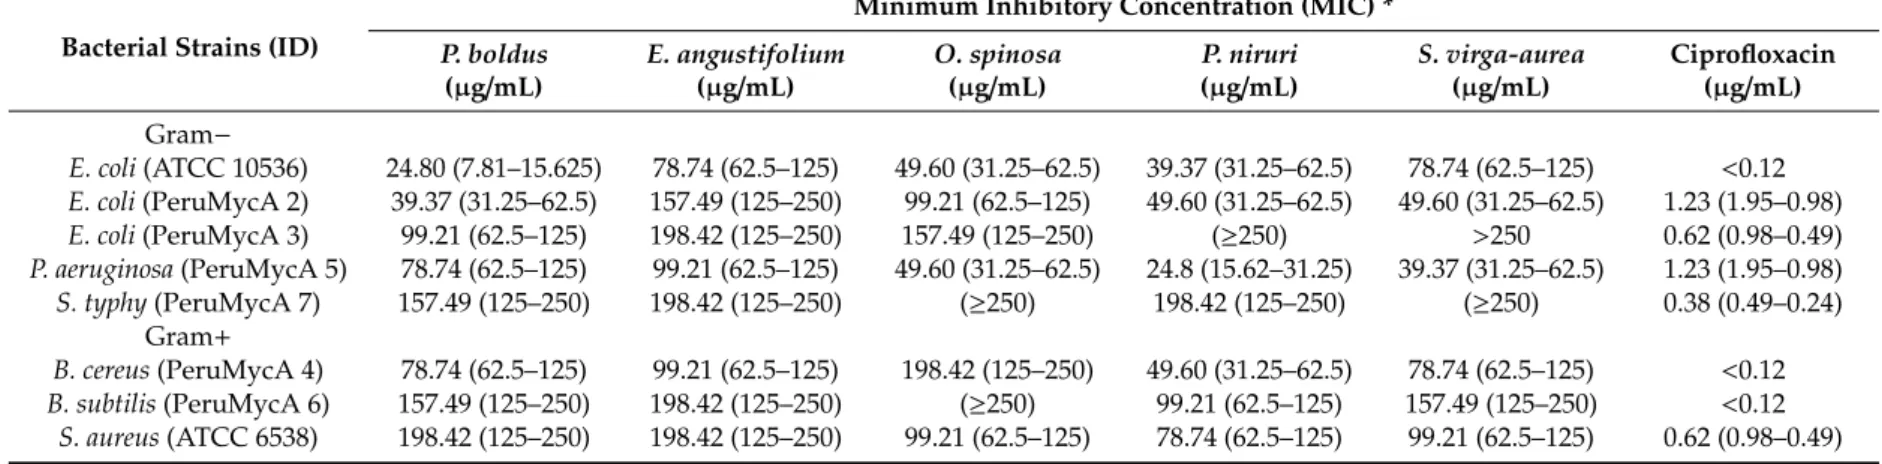 Table 4. Minimal inhibitory concentrations (MICs) of plant extracts against bacterial strains.